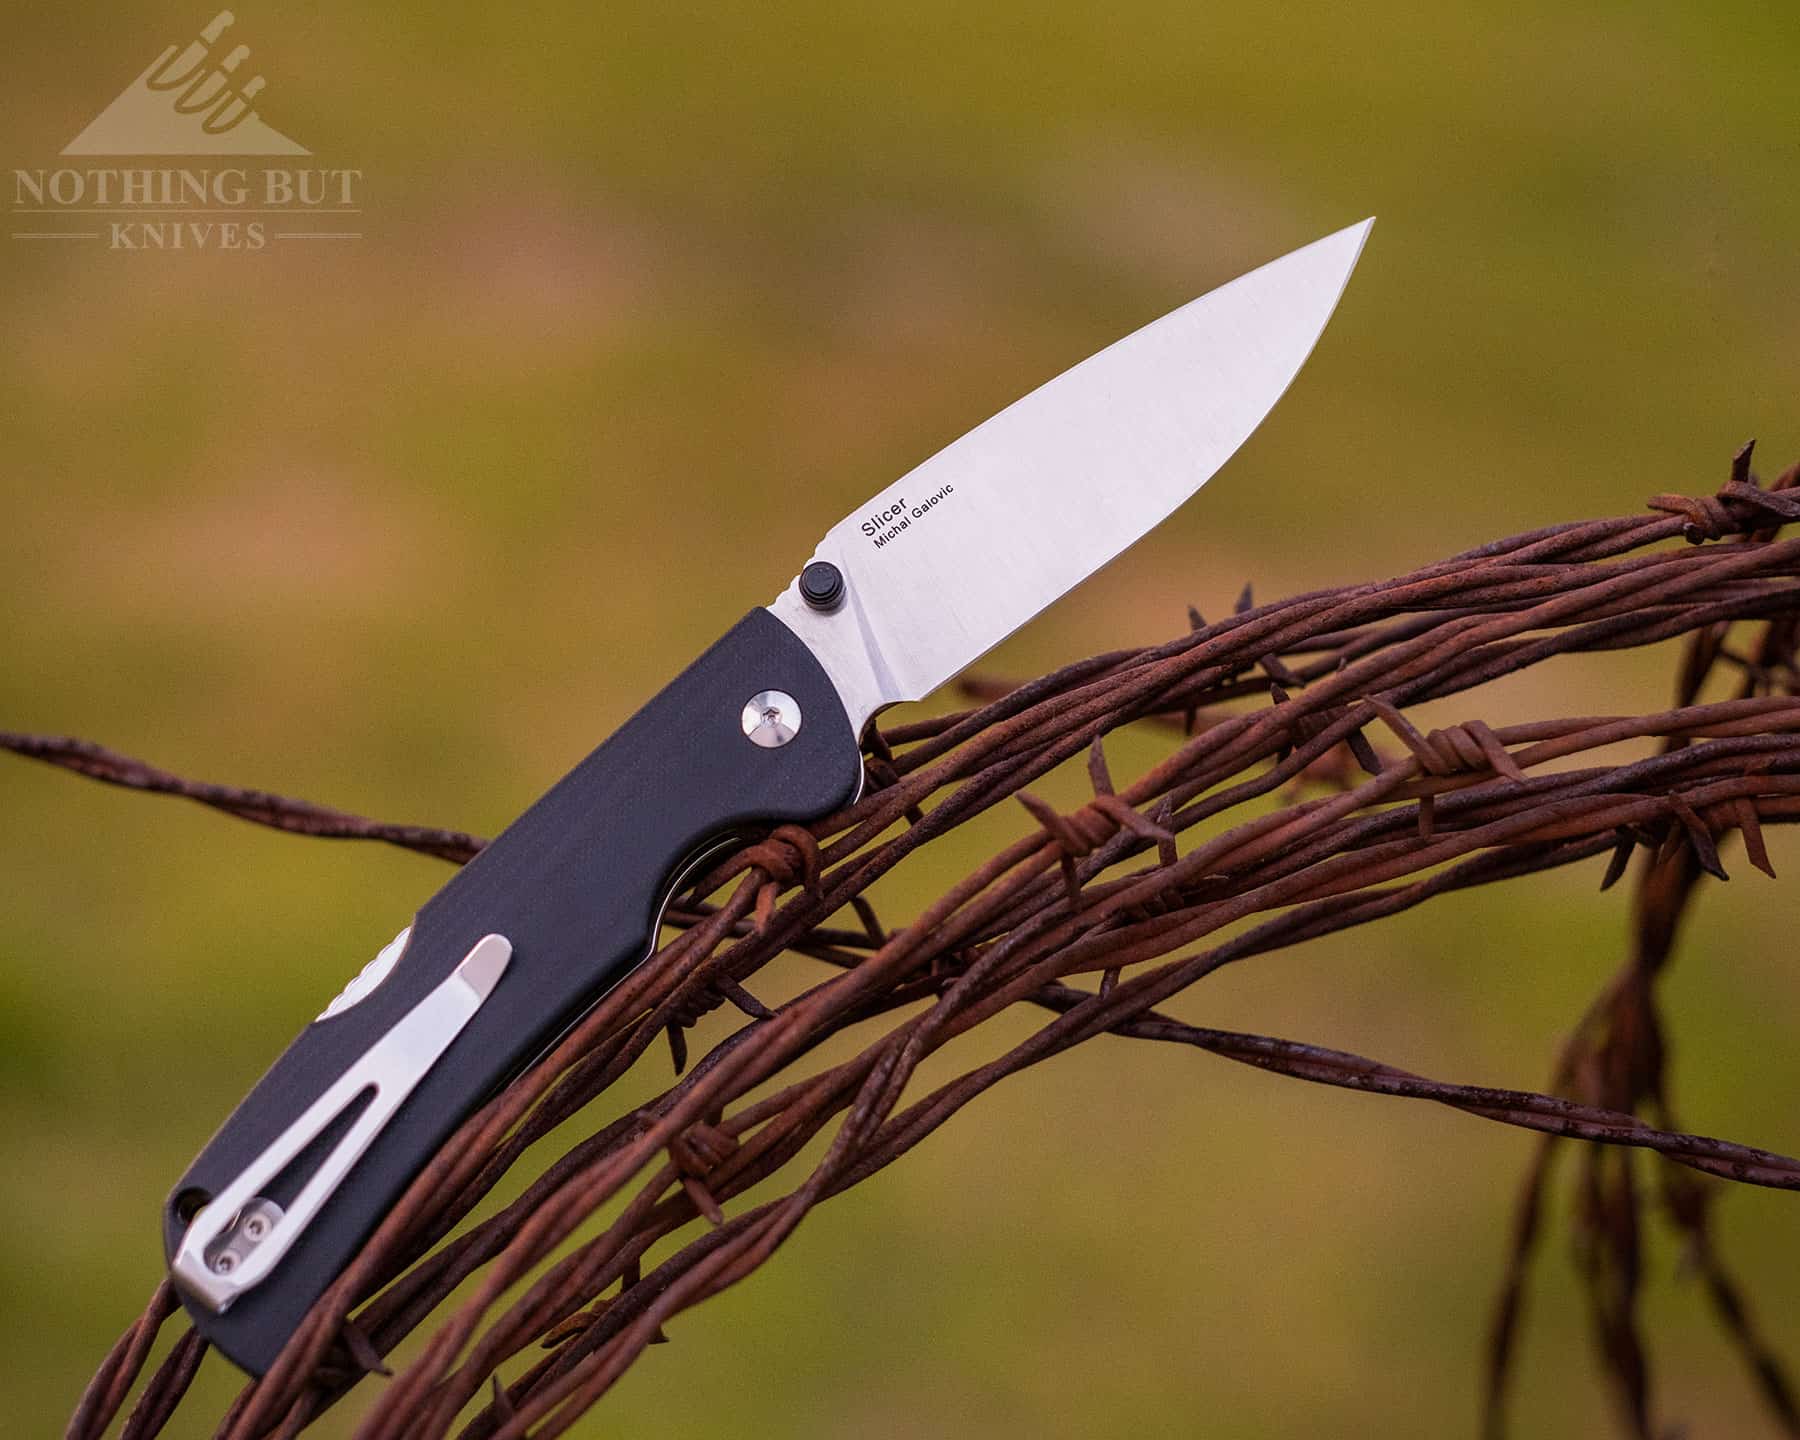 The Kizer Vanguard Slicer is a tough pocket knife with a sturdy back lock and a practical design. 